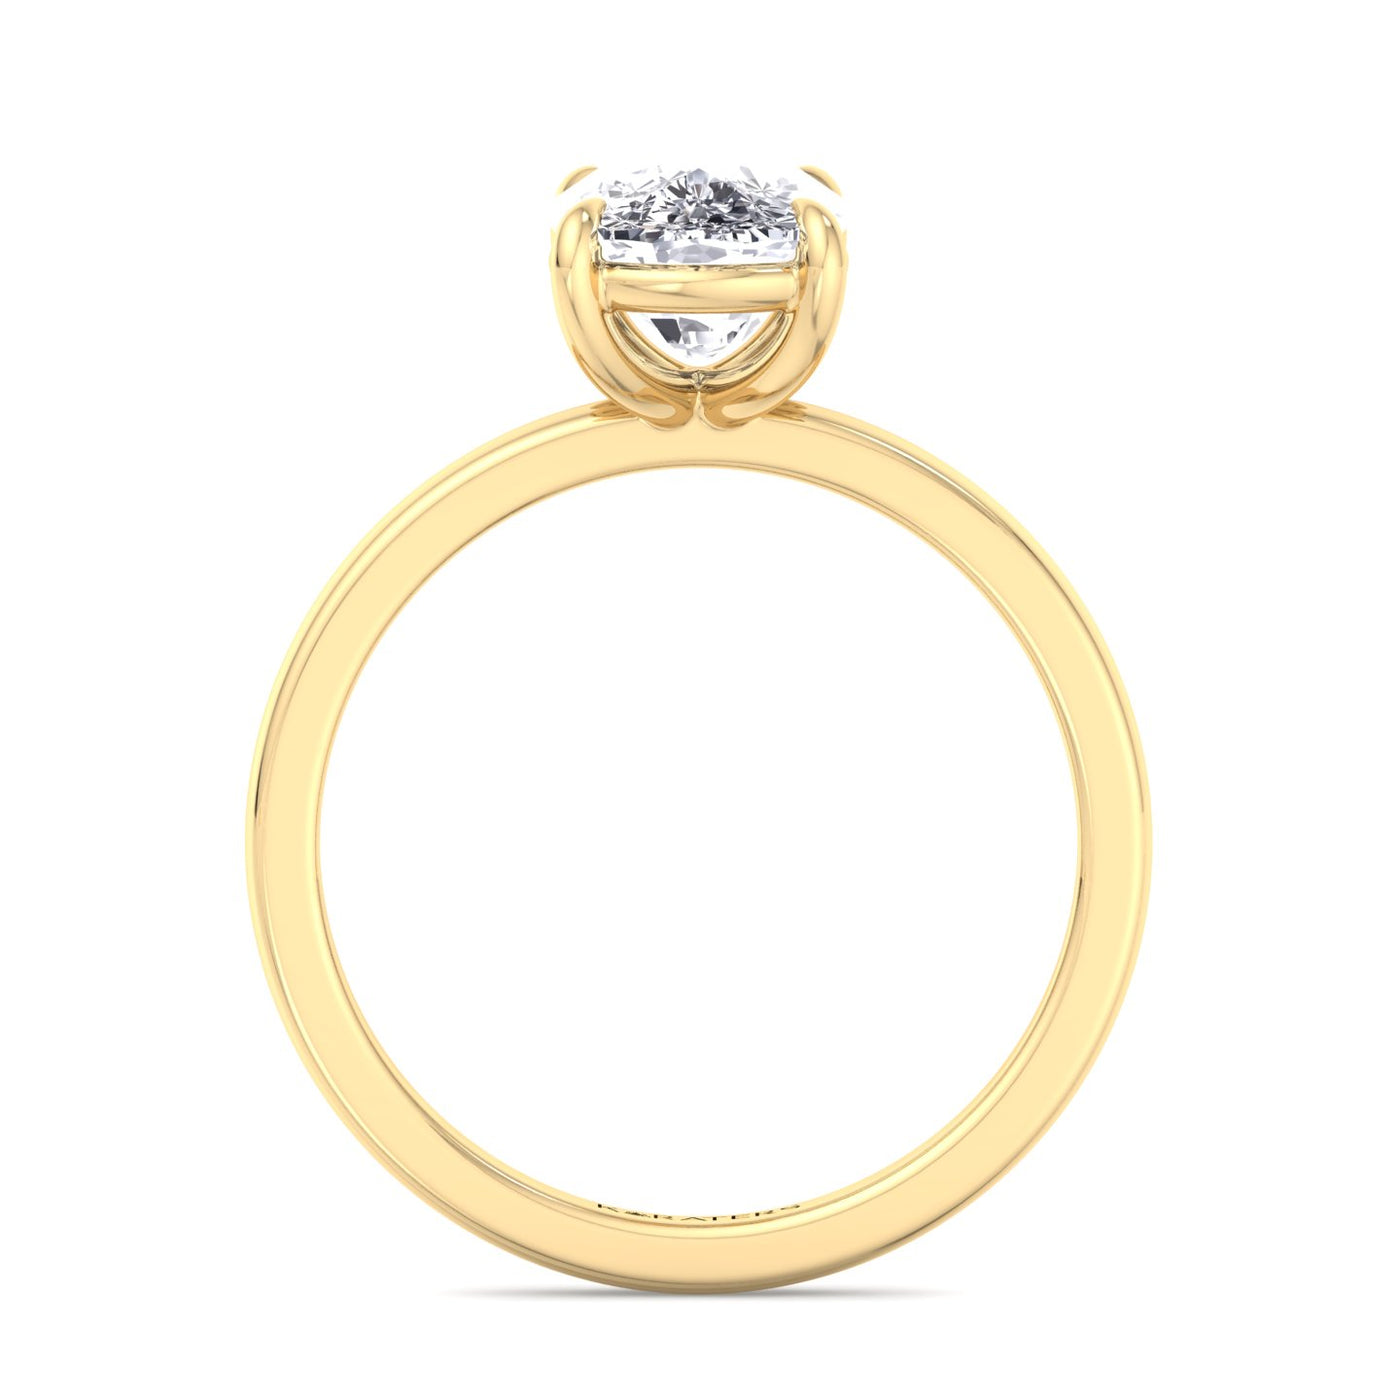 elongated-cushion-cut-solitaire-lab-grown-diamond-engagement-ring-solid-yellow-gold-band